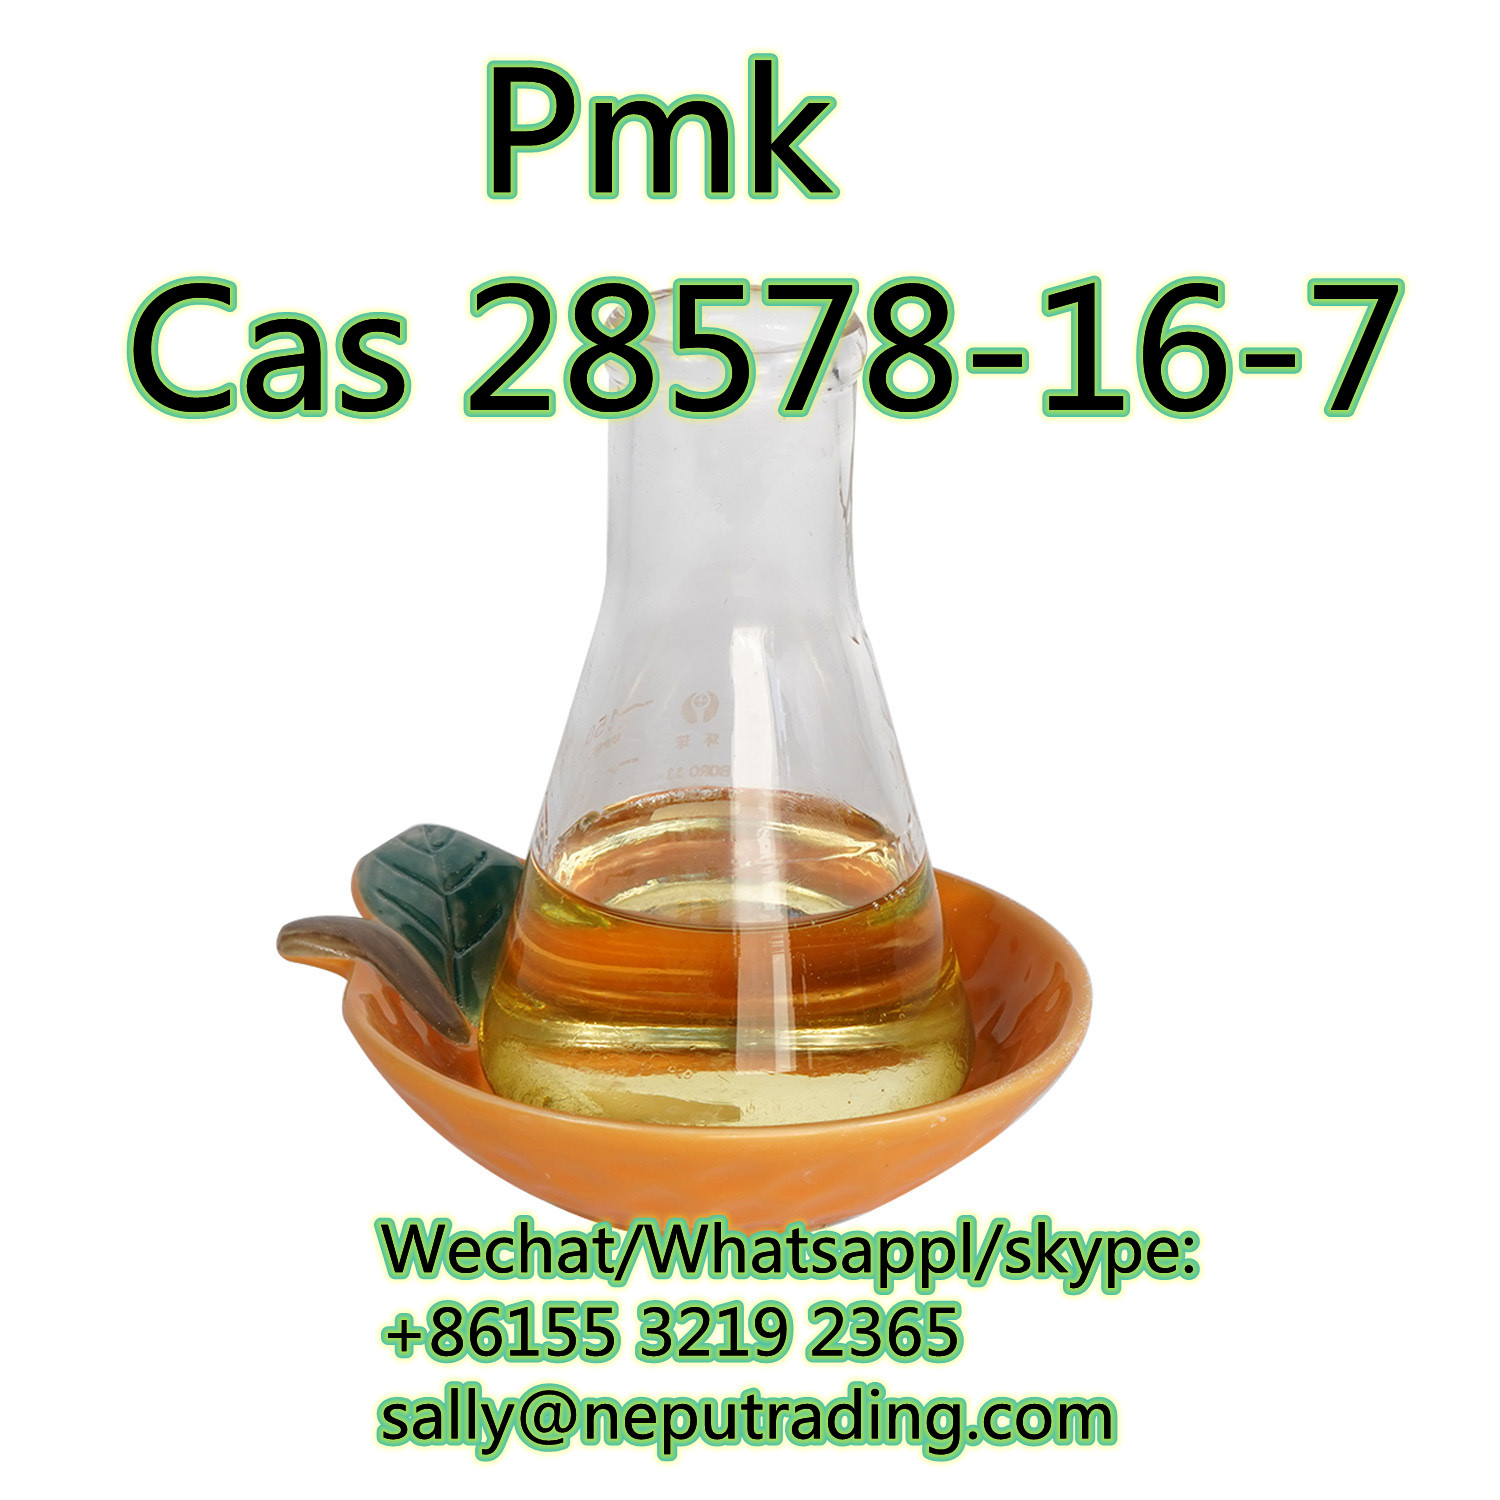 NEW Pmk Oil Cas 28578-16-7 PMK Ethyl Glycidate Safe Delivery To Each Country